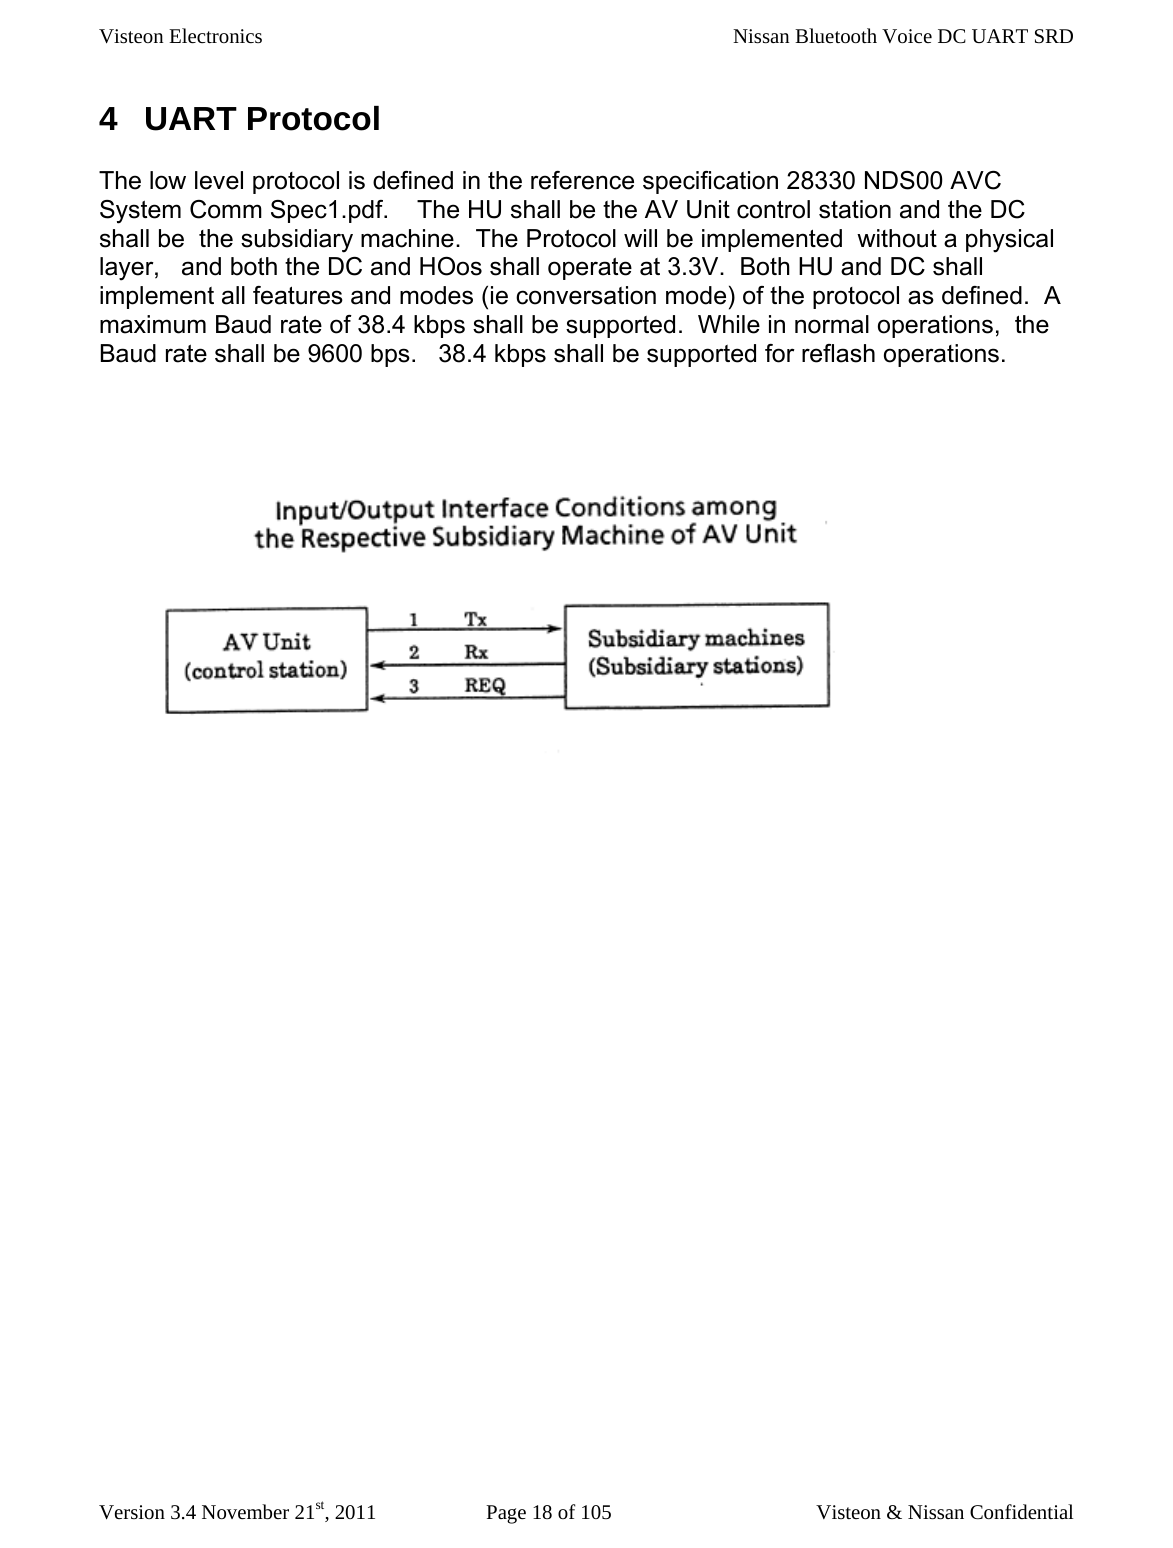 Visteon Electronics    Nissan Bluetooth Voice DC UART SRD  Version 3.4 November 21st, 2011  Page 18 of 105  Visteon &amp; Nissan Confidential 4 UART Protocol The low level protocol is defined in the reference specification 28330 NDS00 AVC System Comm Spec1.pdf.    The HU shall be the AV Unit control station and the DC shall be  the subsidiary machine.  The Protocol will be implemented  without a physical layer,   and both the DC and HOos shall operate at 3.3V.  Both HU and DC shall implement all features and modes (ie conversation mode) of the protocol as defined.  A maximum Baud rate of 38.4 kbps shall be supported.  While in normal operations,  the Baud rate shall be 9600 bps.   38.4 kbps shall be supported for reflash operations.        